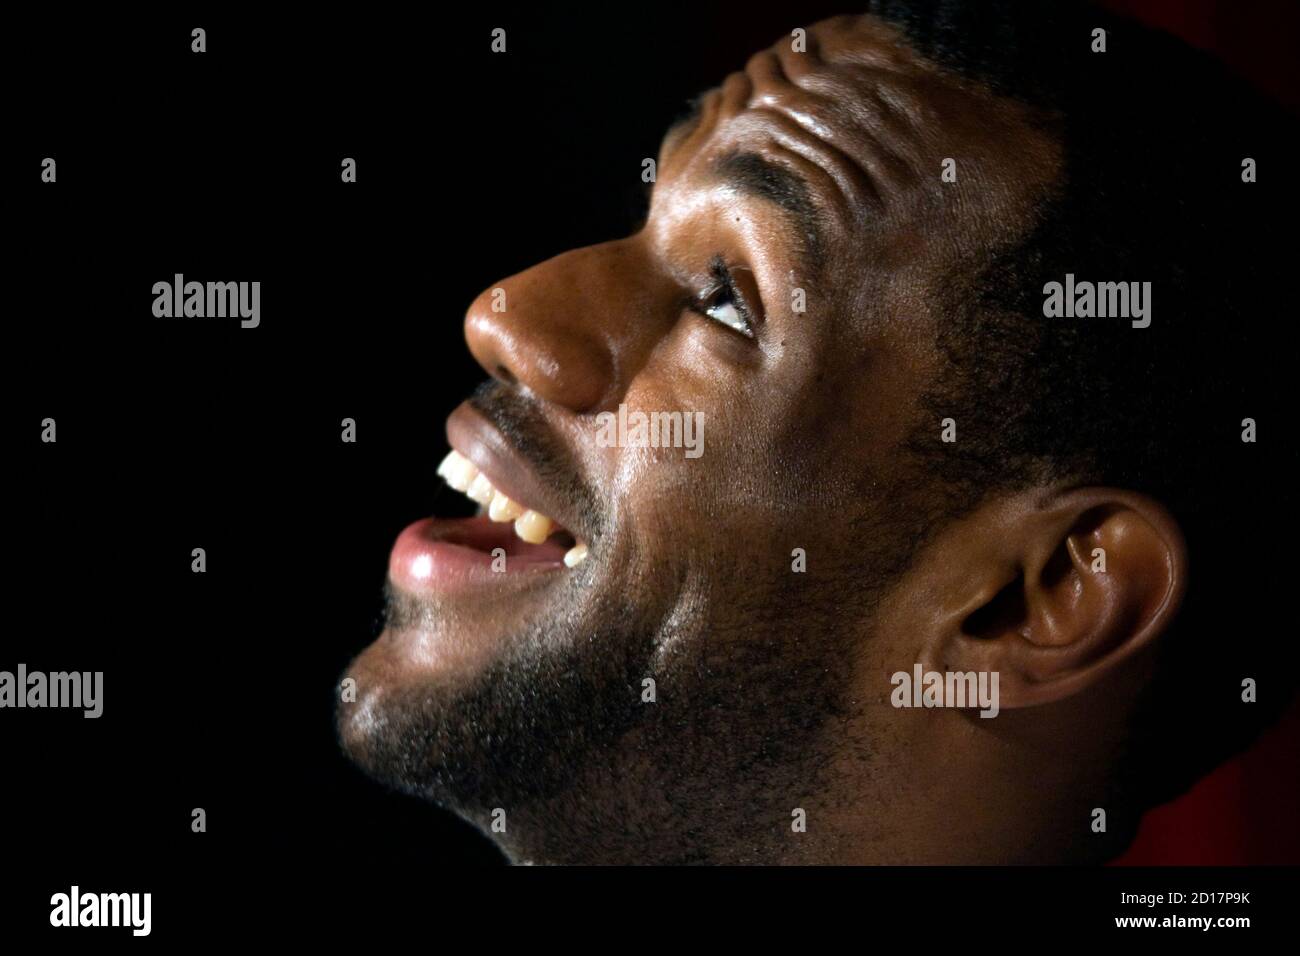 Basketball player LeBron James of U.S. team Cleveland Cavaliers answers  reporters during a promotional event in Paris September 1, 2009. James is  in France on a worldwide tour to promote a new